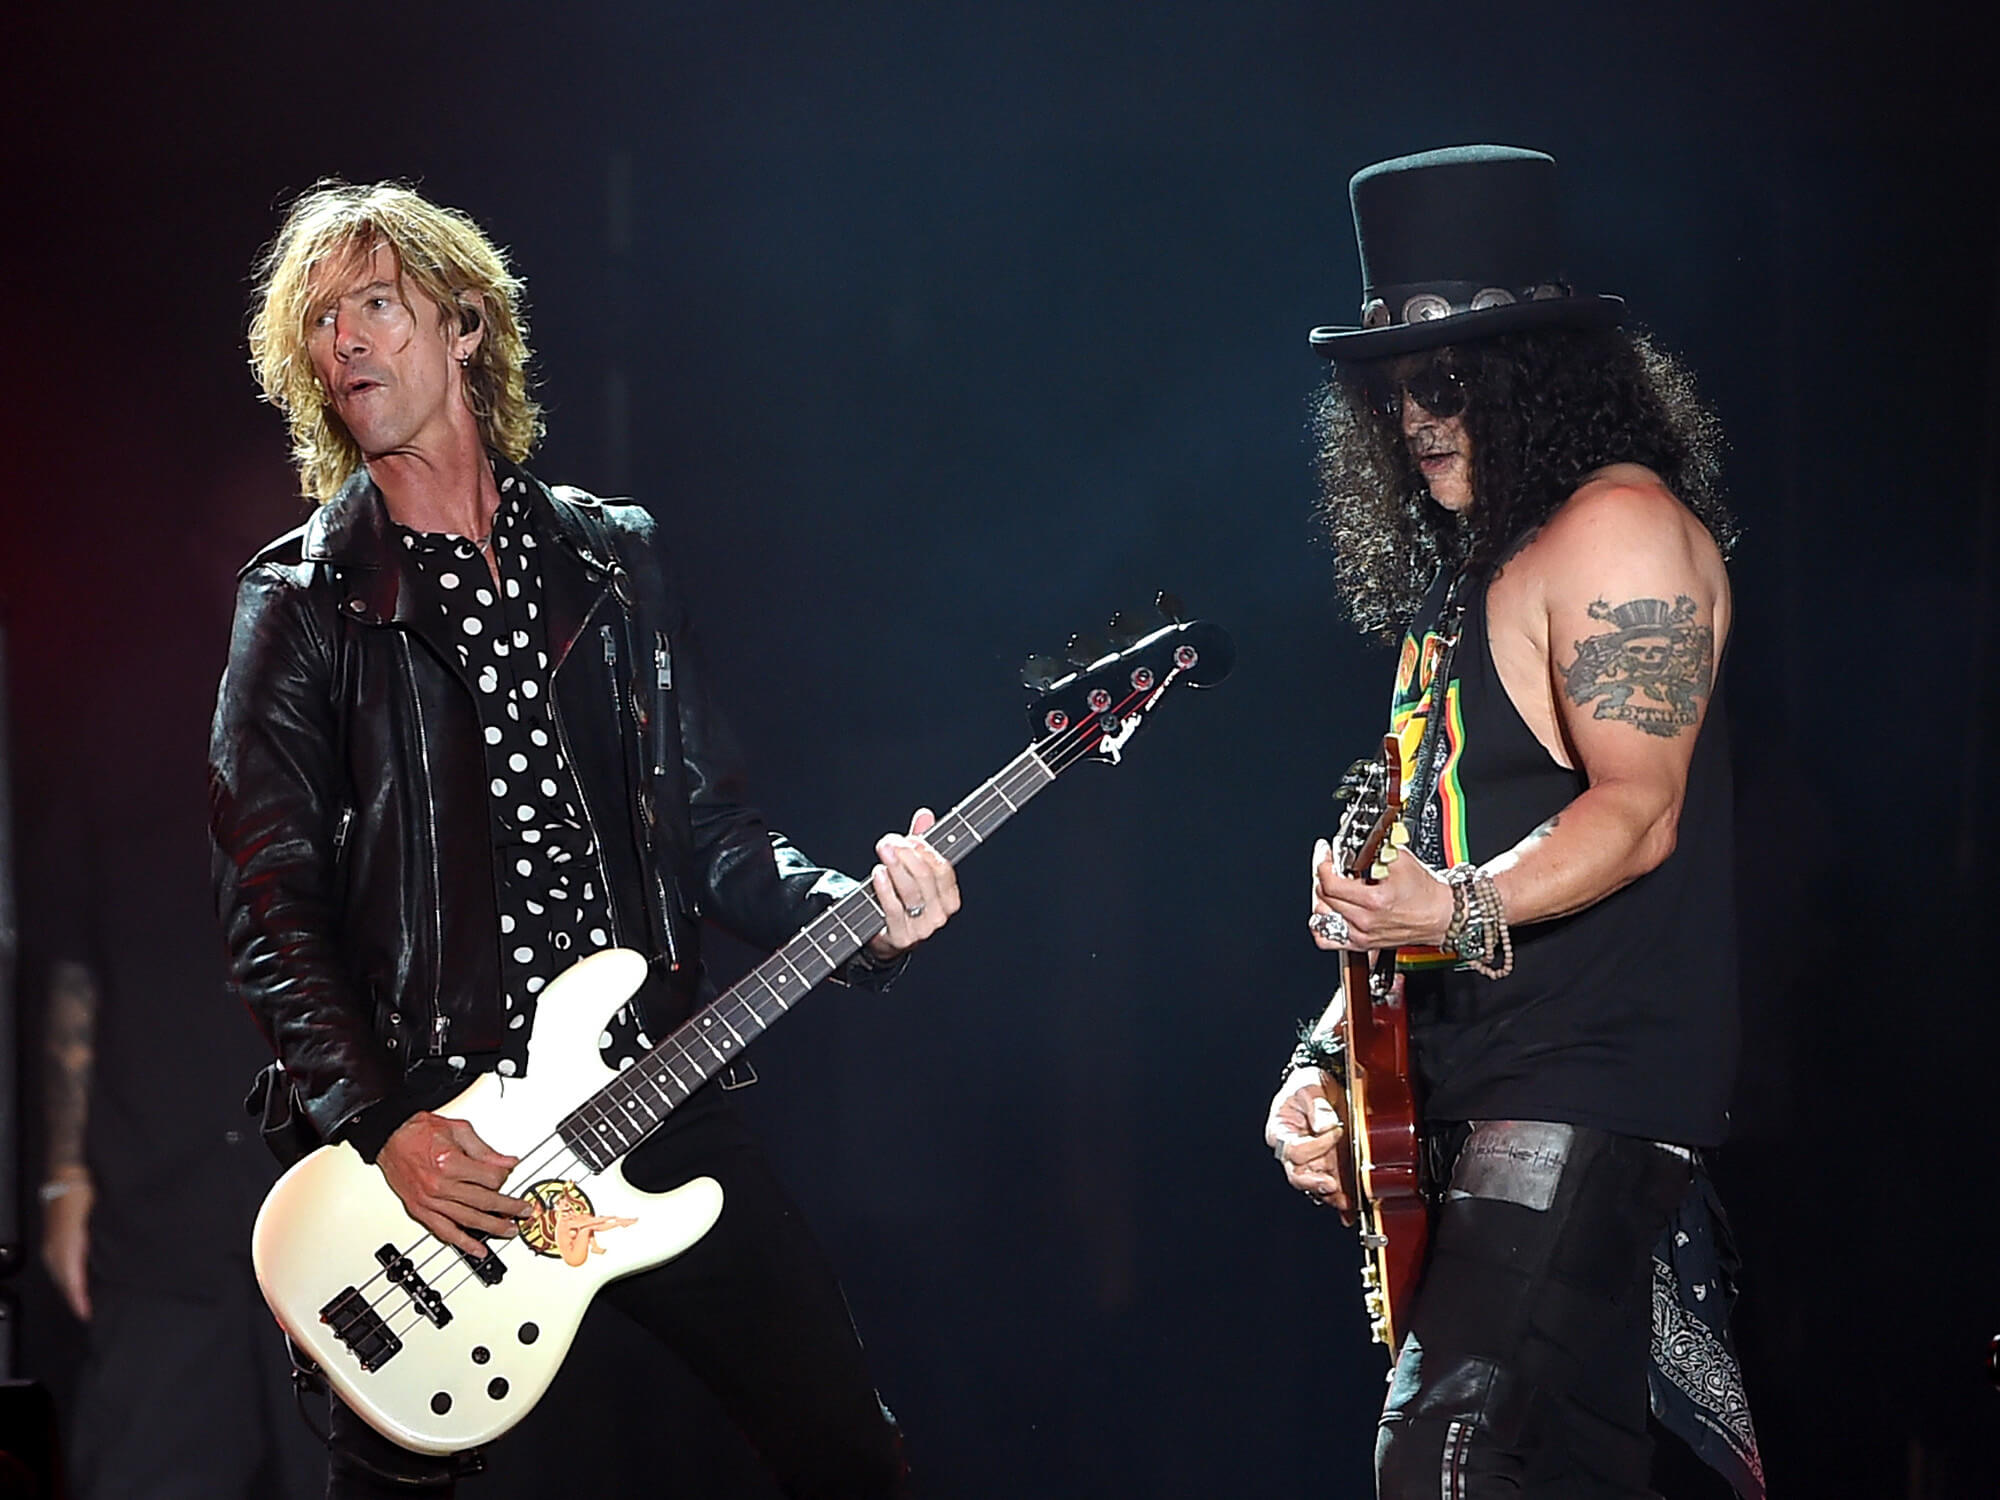 Duff McKagan and Slash on stage. They are turned towards each other. Duff is looking over his shoulder and Slash is looking down. They both have their guitars in hand.